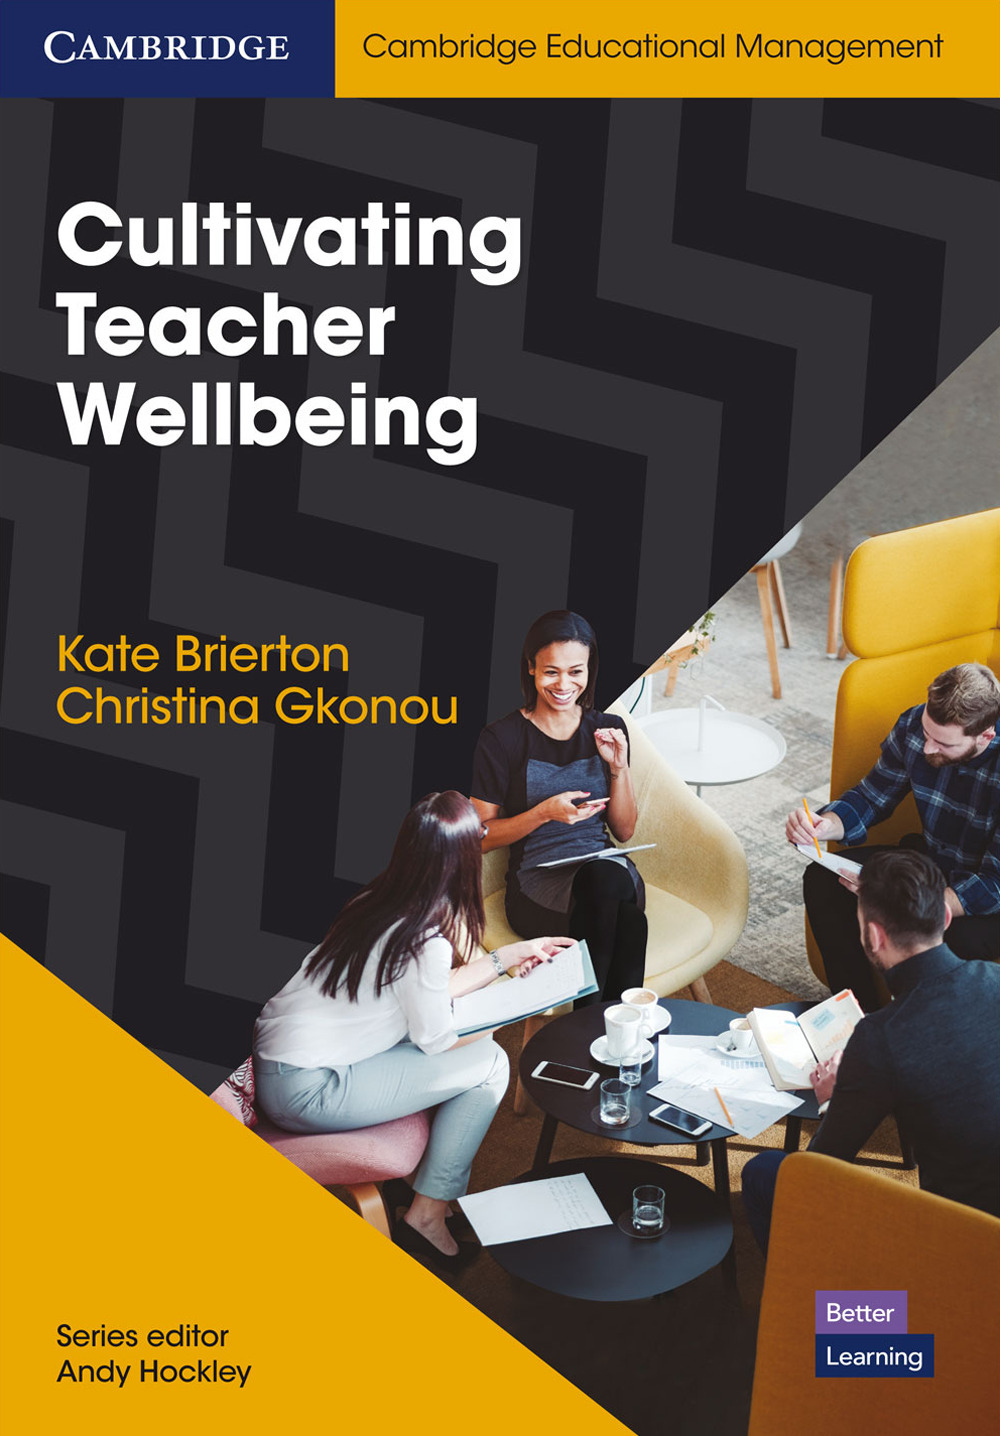 Cultivating teacher wellbeing. Supporting teachers to flourish and thrive